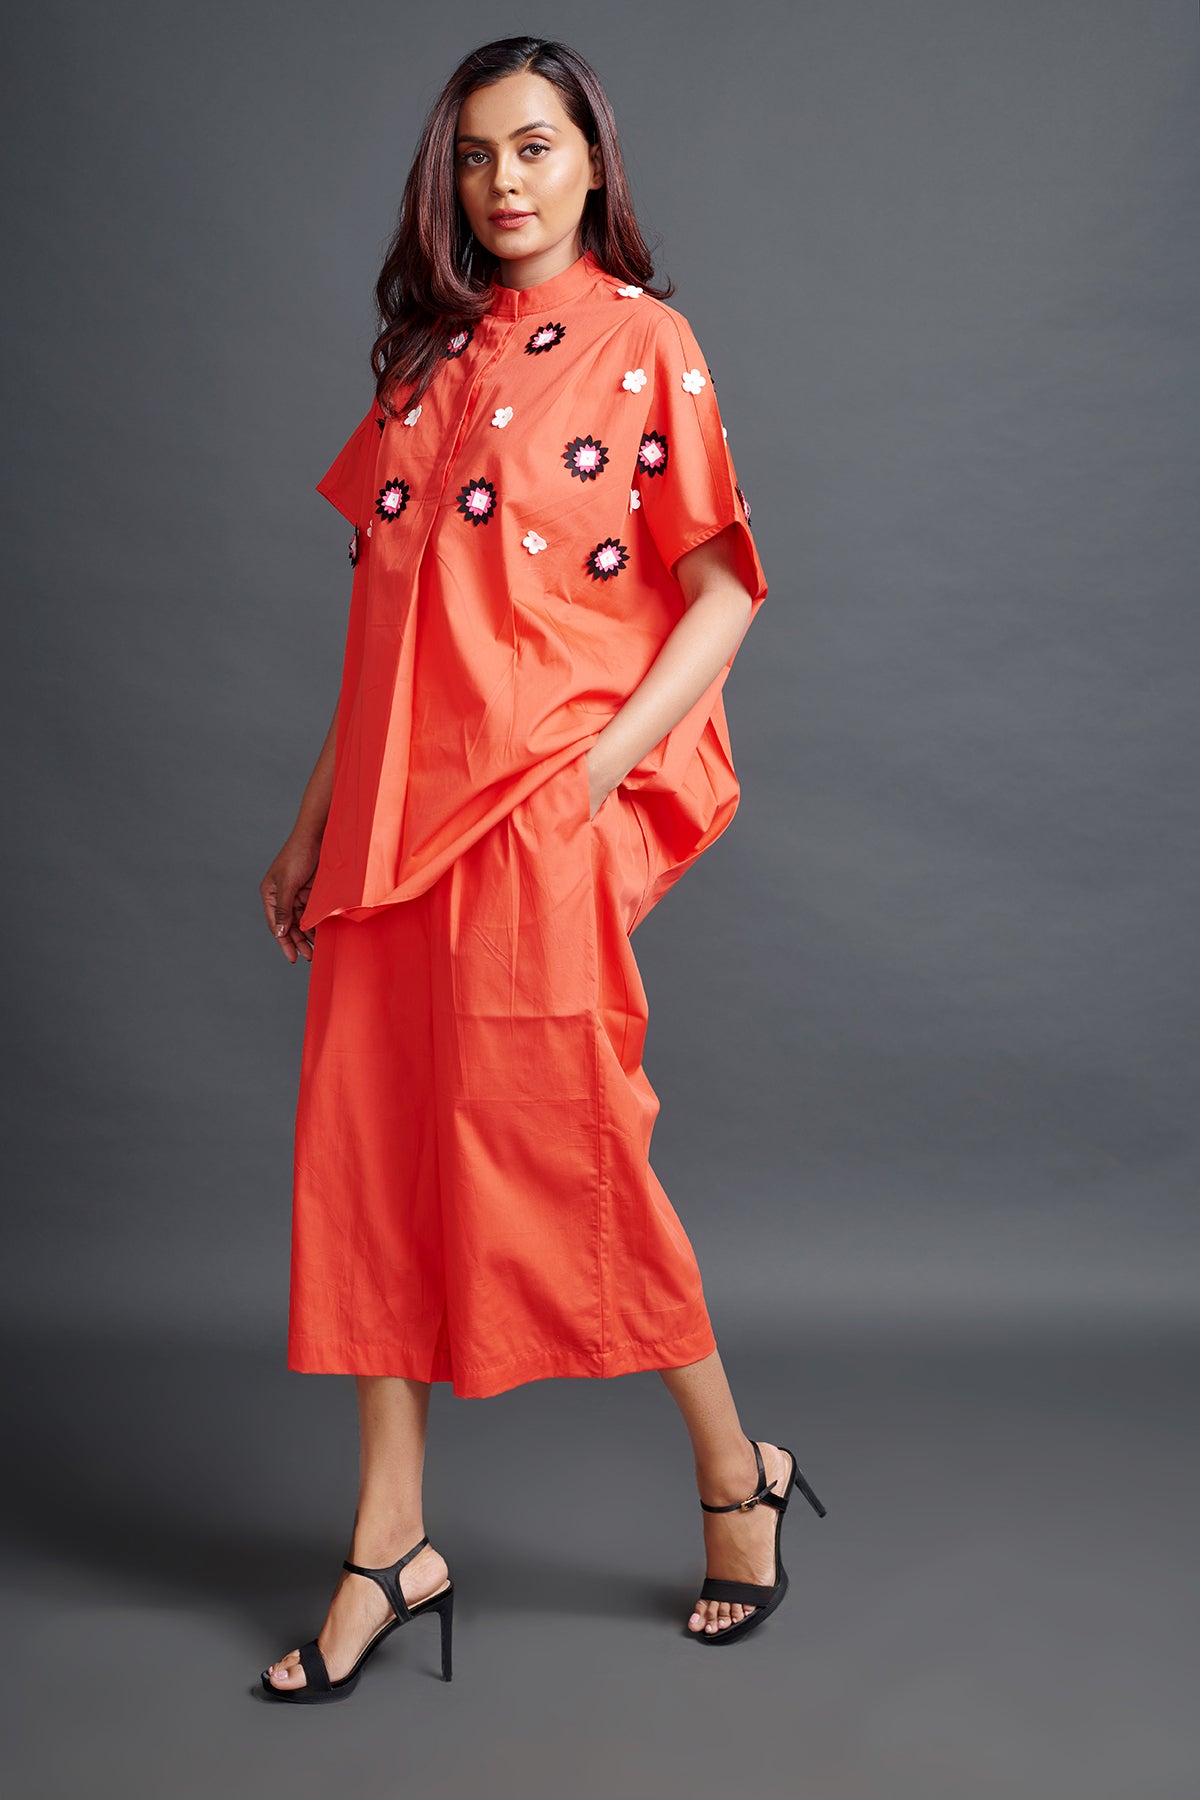 Image of ORANGE OVERSIZED SHIRT IN COTTON BASE WITH CUTWORK EMBROIDERY. IT IS PAIRED WITH MATCHING PANTS. From savoirfashions.com